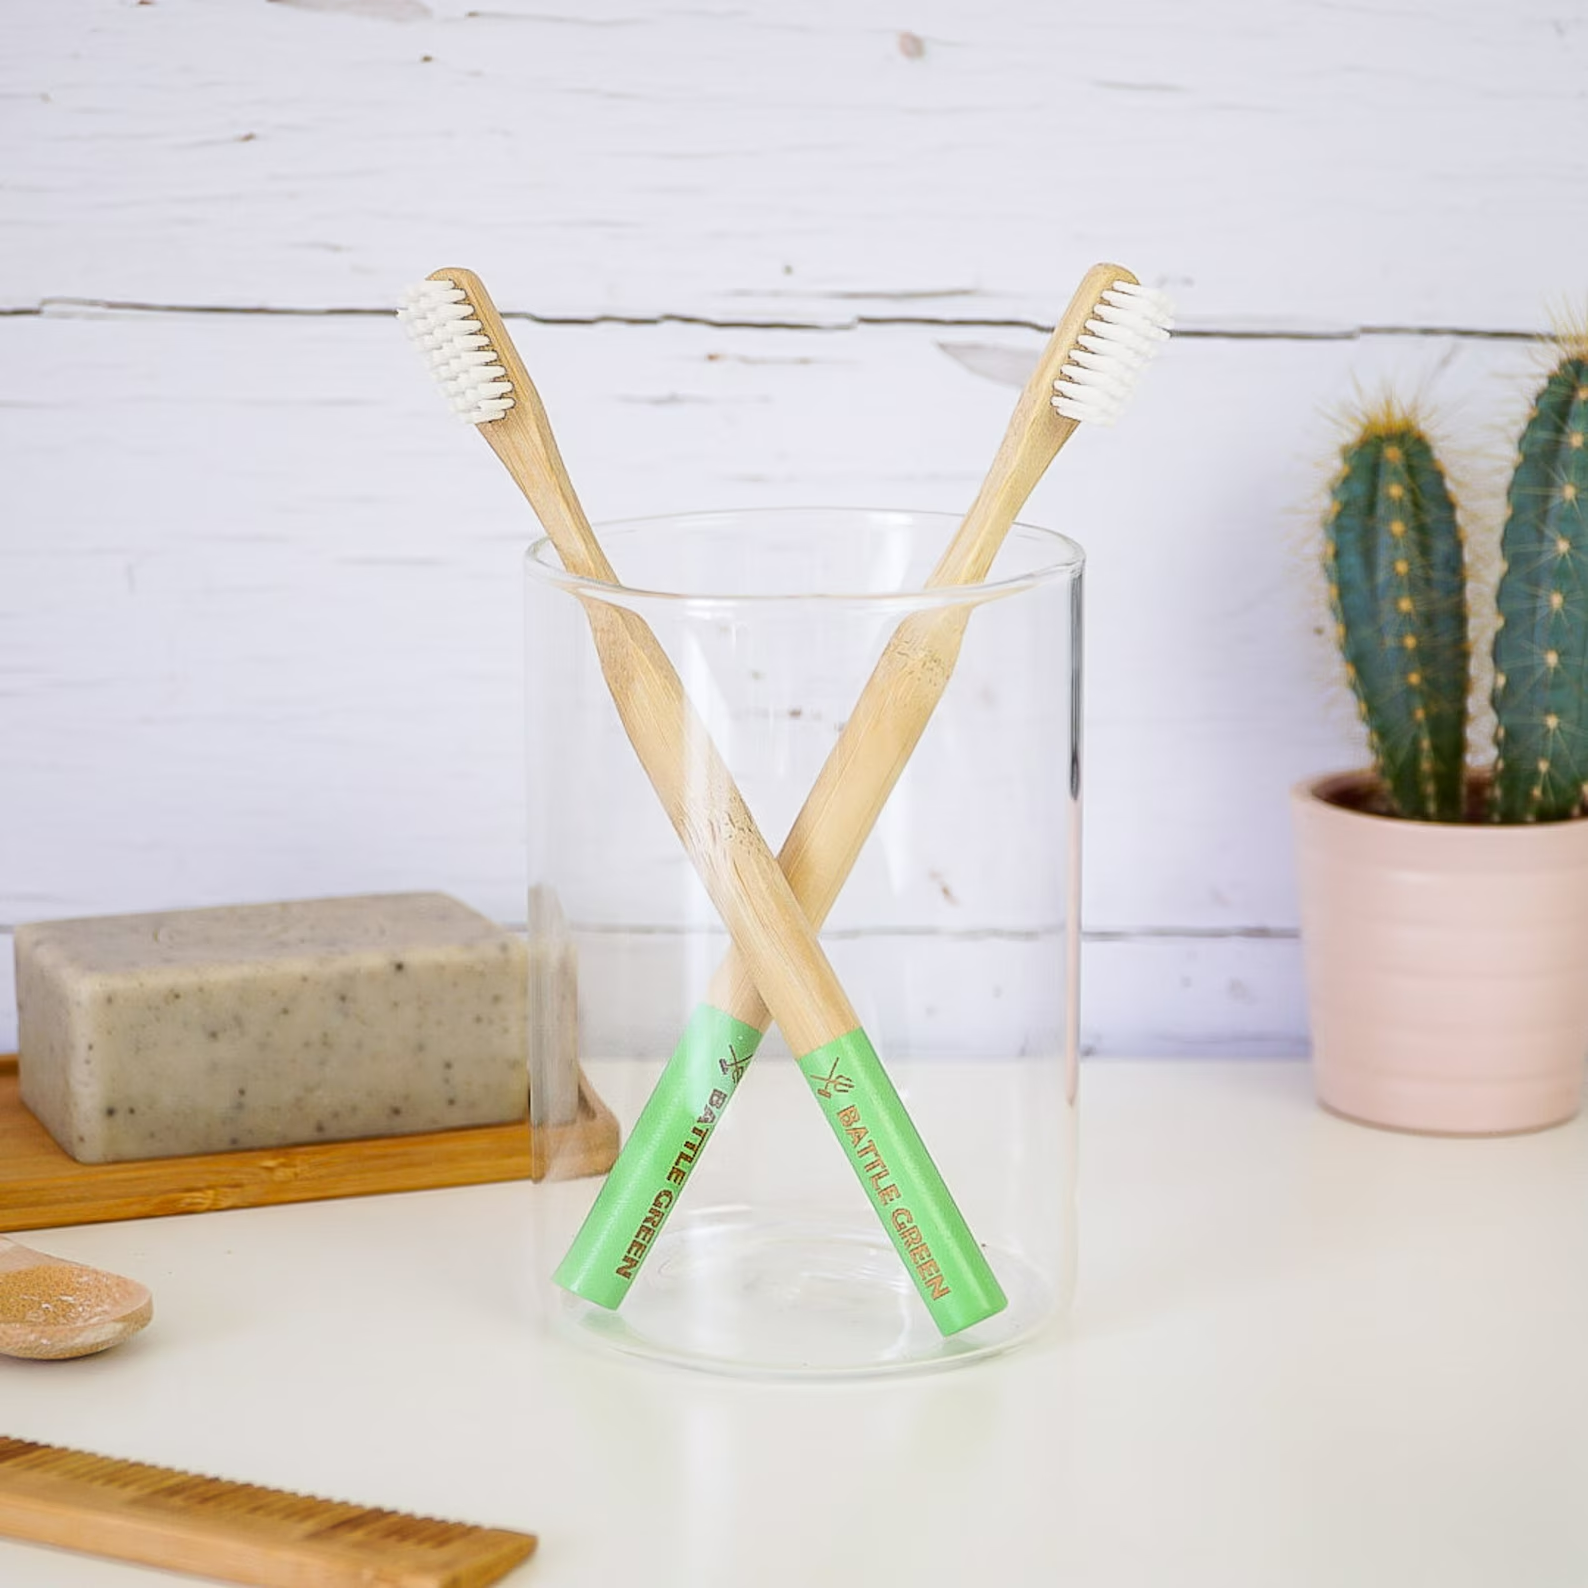 bamboo toothbrushes with castor oil bristles